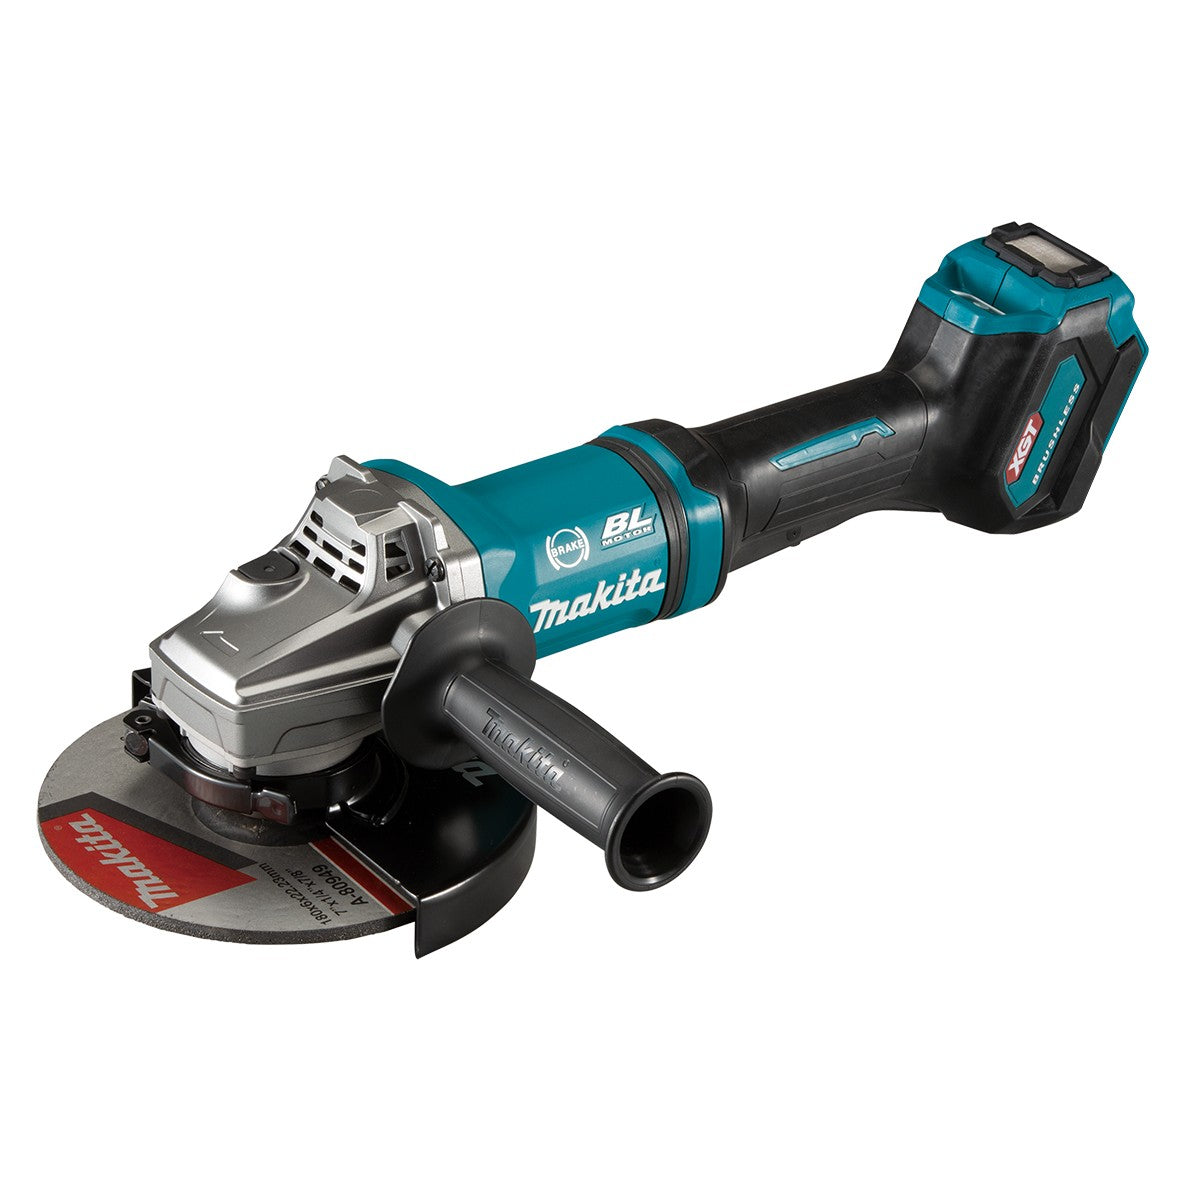 40V 180mm (7") Brushless Angle Grinder Bare (Tool Only) GA037GZ by Makita